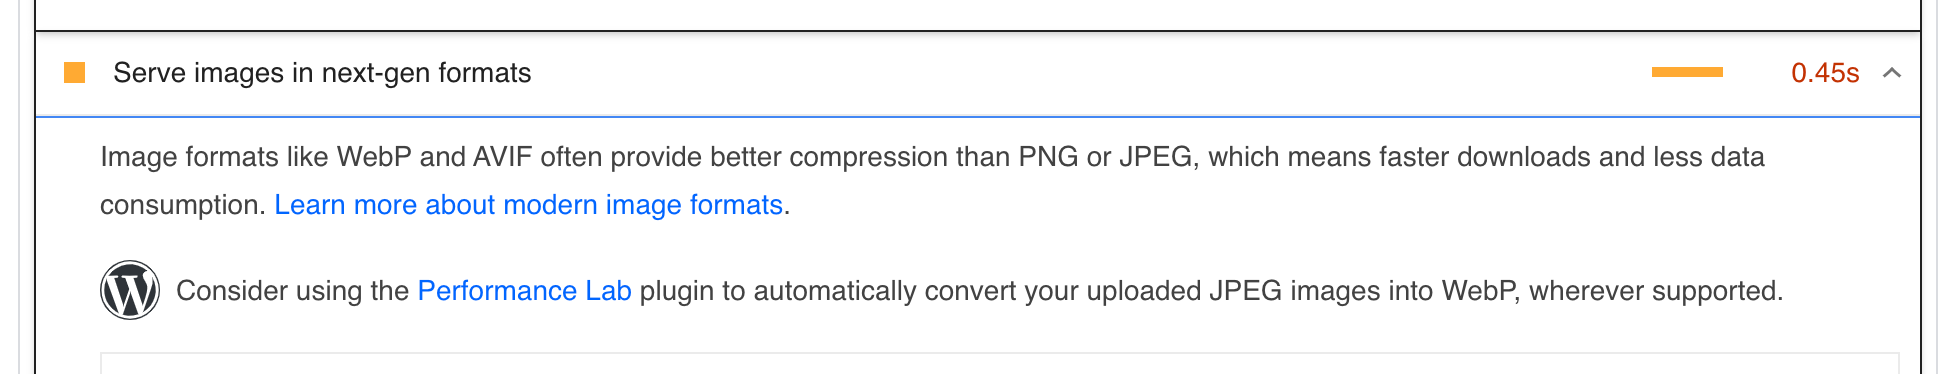 PageSpeed suggesting modern image formats